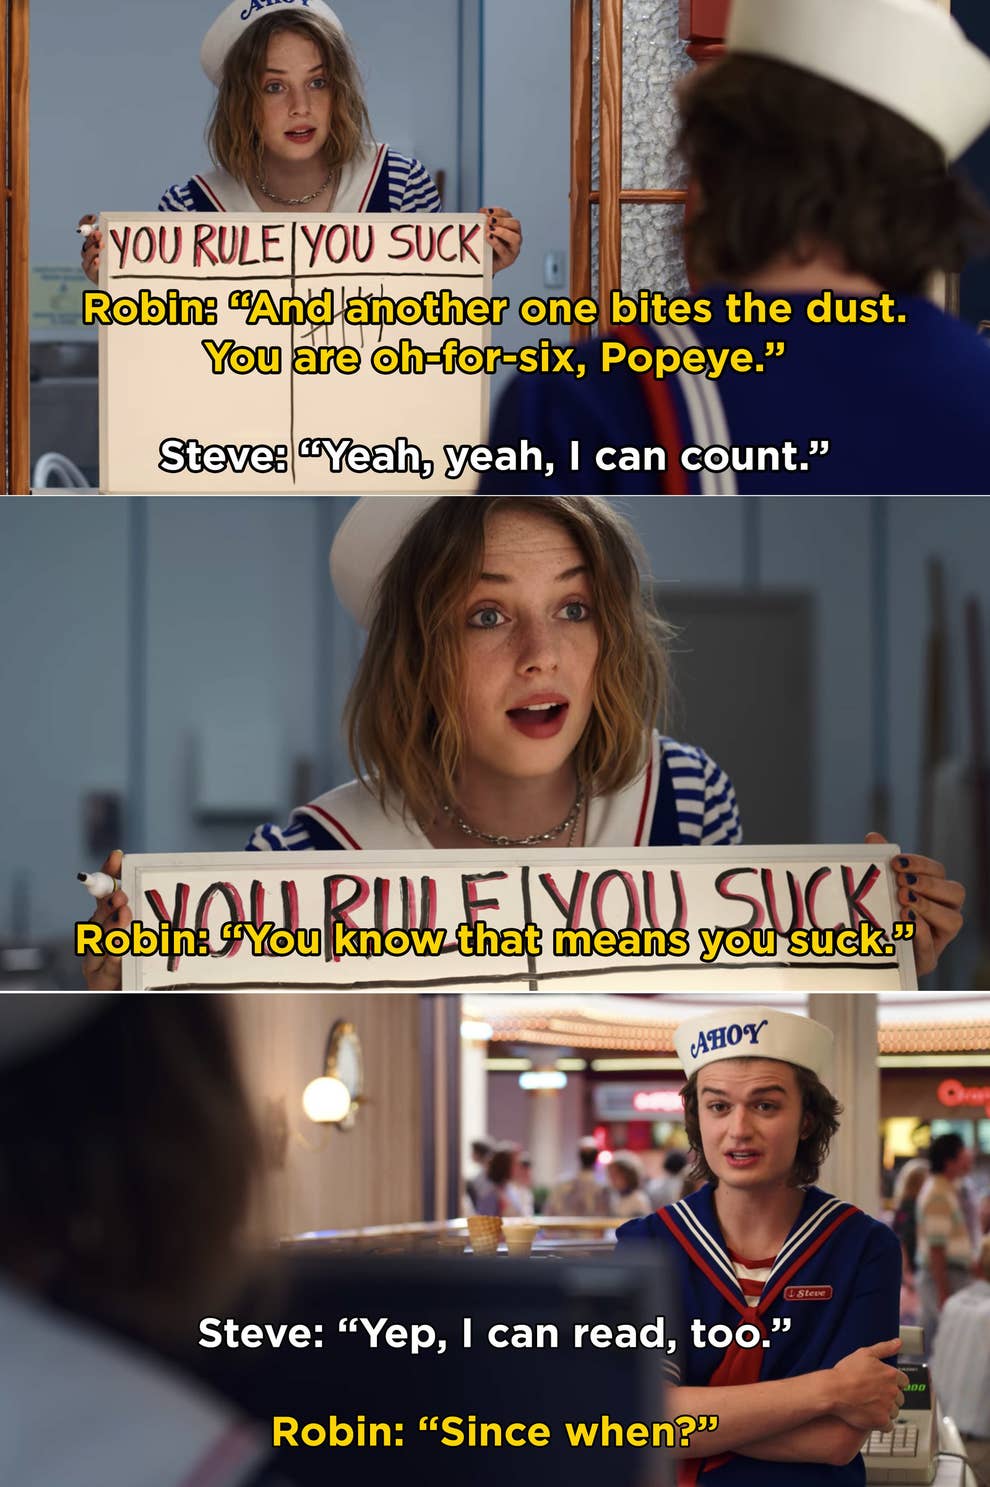 Stranger Things Quotes